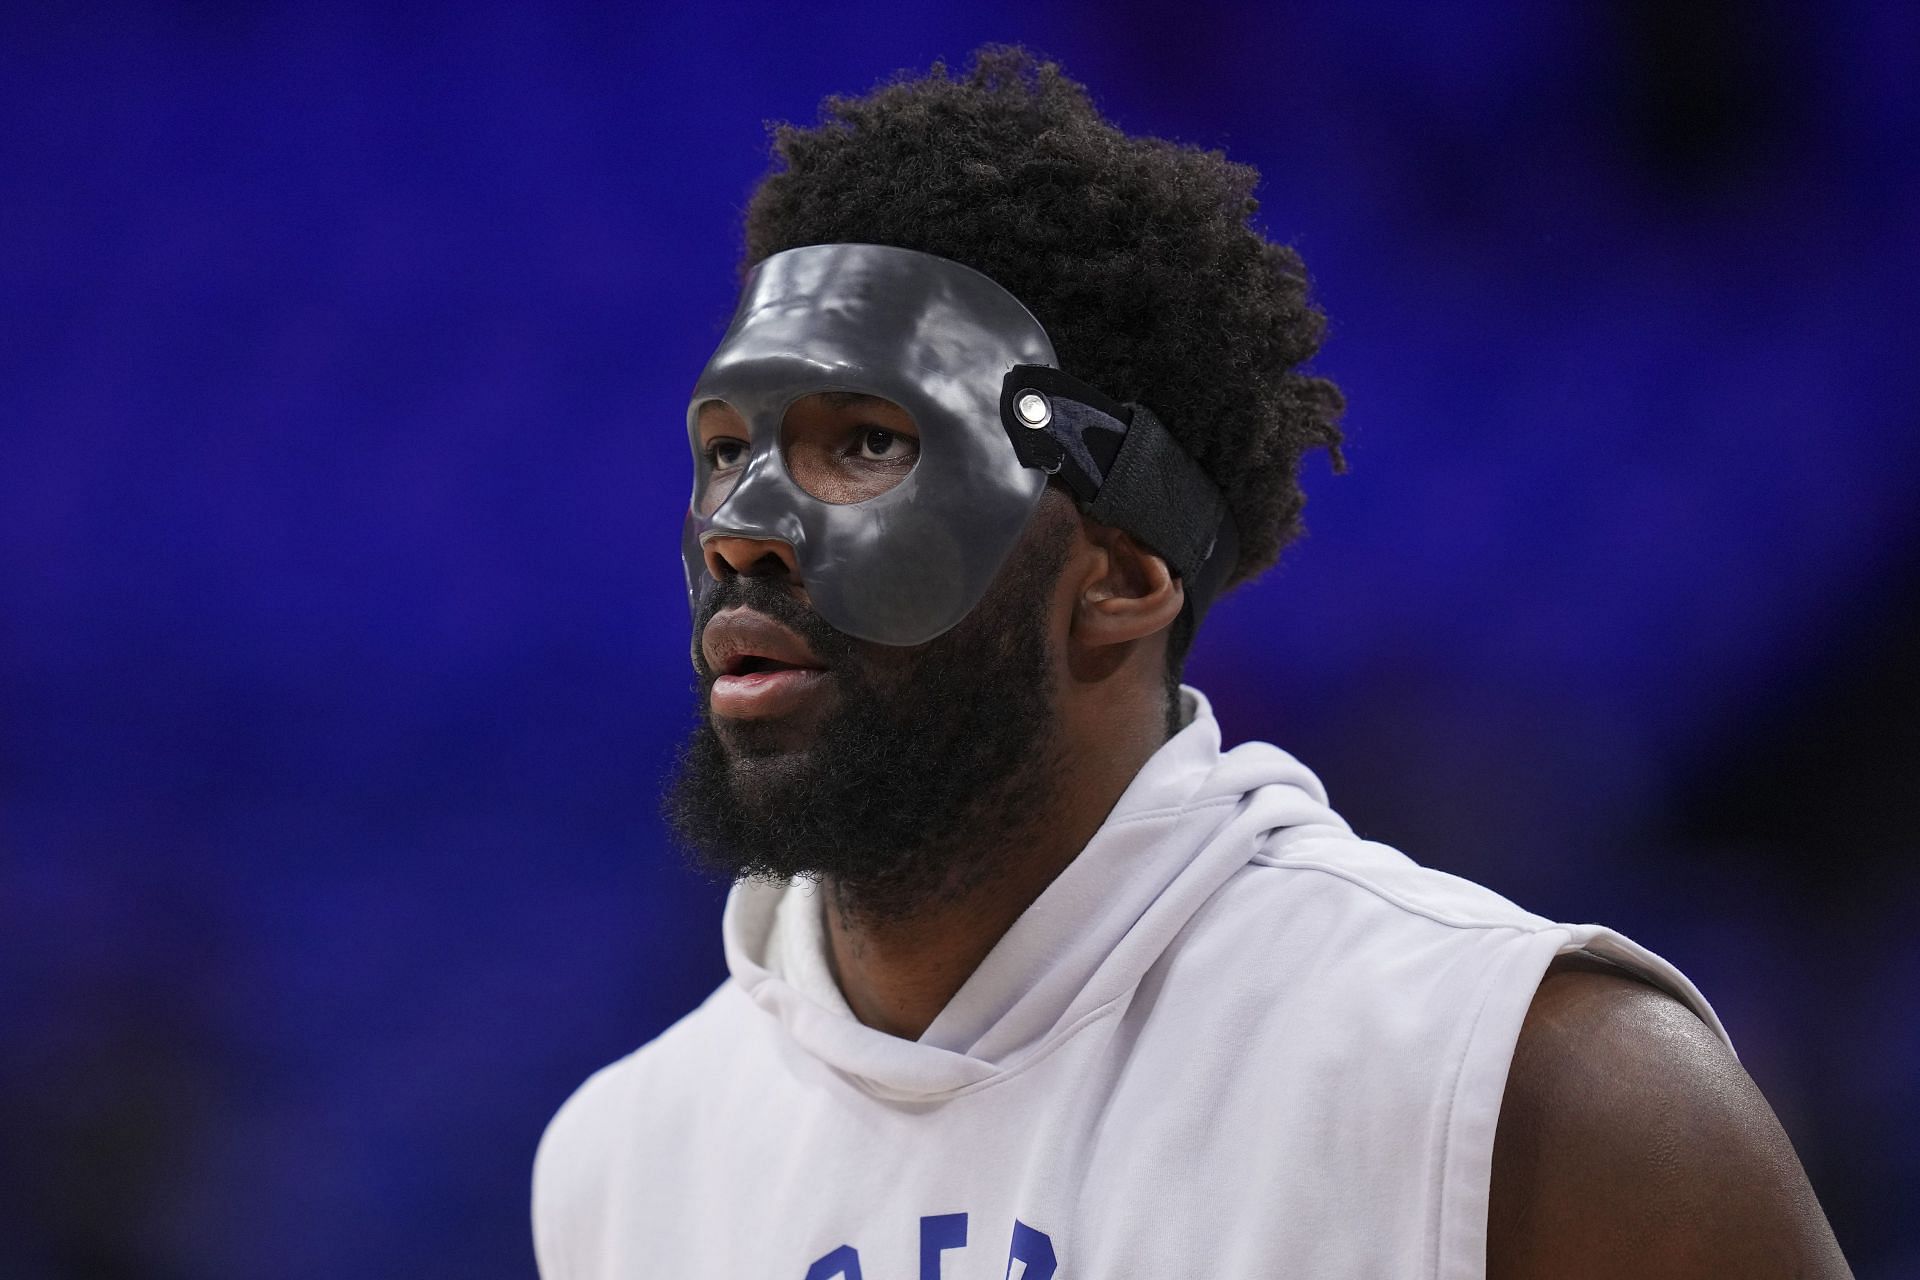 Joel Embiid of the Philadelphia 76ers looks on before Game 3 of the Eastern Conference semifinals against the Miami Heat at the Wells Fargo Center on Friday in Philadelphia, Pennsylvania.